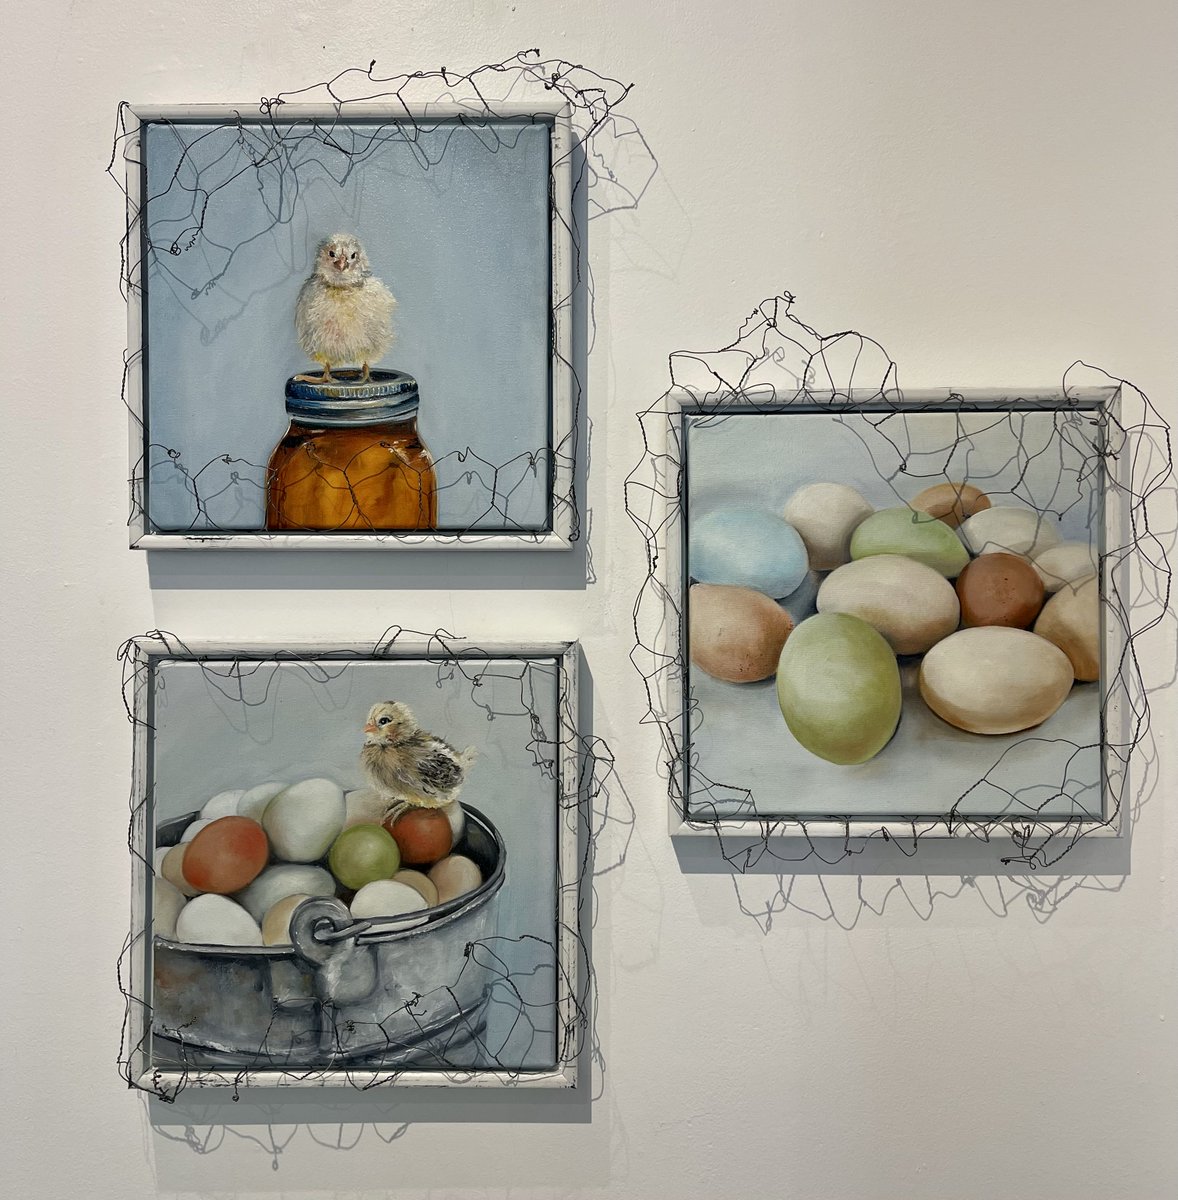 NEW ARTIST We are excited to welcome Kristine Andrea to the Gallery.  Her original oil, chicken wire accented on frame paintings can be viewed in The Gallery or online thegalleryatmatticksfarm.com/kristine-andrea

#oilpainting #originalart #chickenwire #unique #canadianartists #localartists